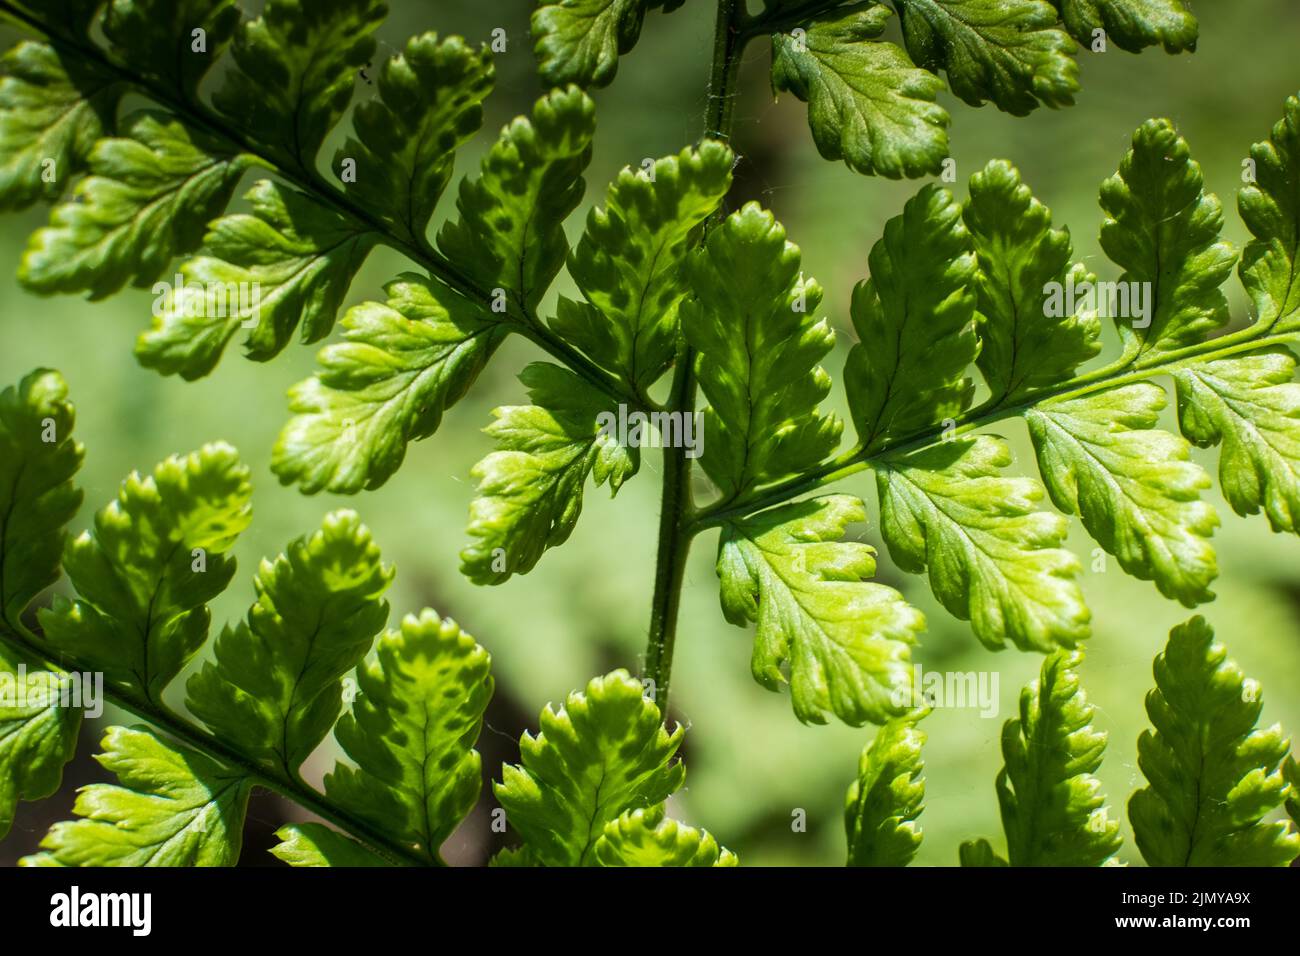 Beautyful ferns leaves, green foliage, natural floral fern background in sunlight. Natural green fern in the forest close up. Stock Photo